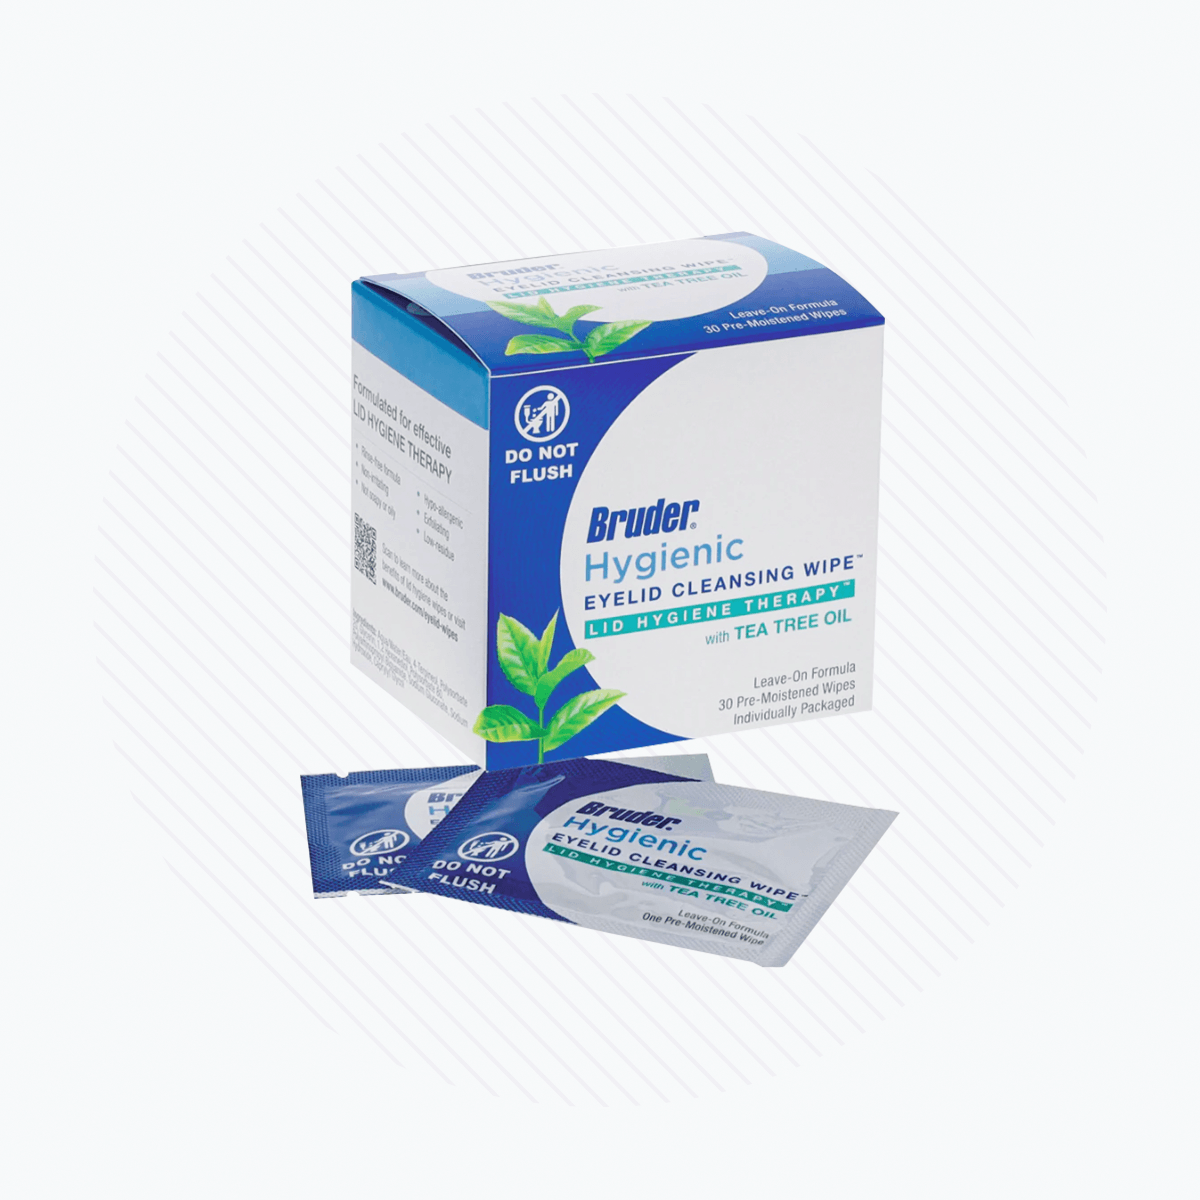 Bruder Hygienic Eyelid Cleansing Wipes with Tea Tree Oil (30ct) - Dryeye Rescue